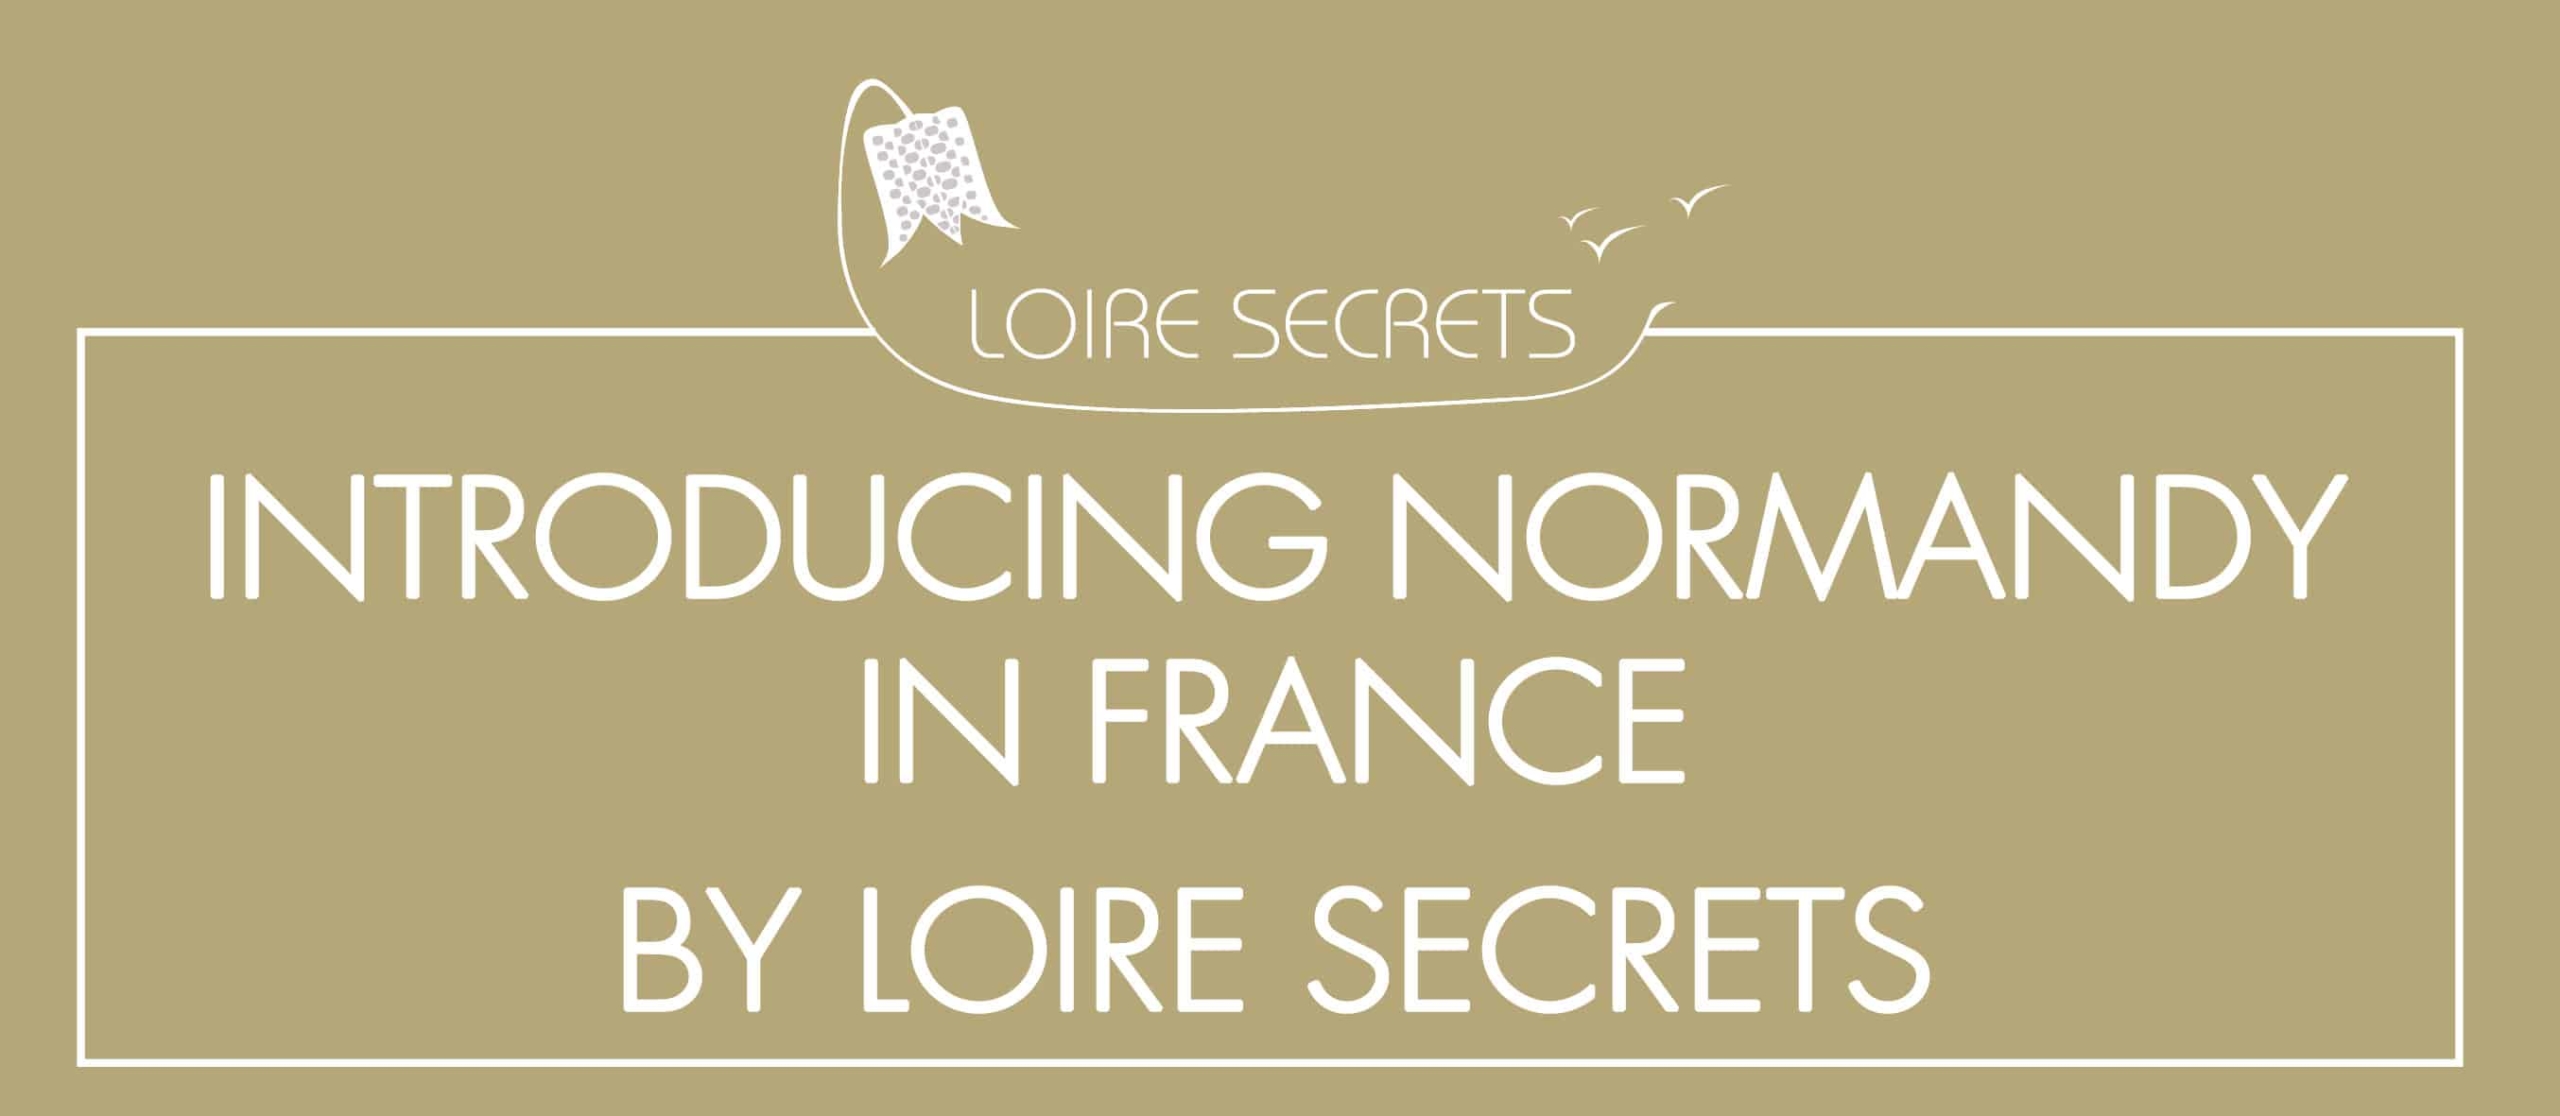 You are currently viewing Introducing Normandy in France by Loire Secrets